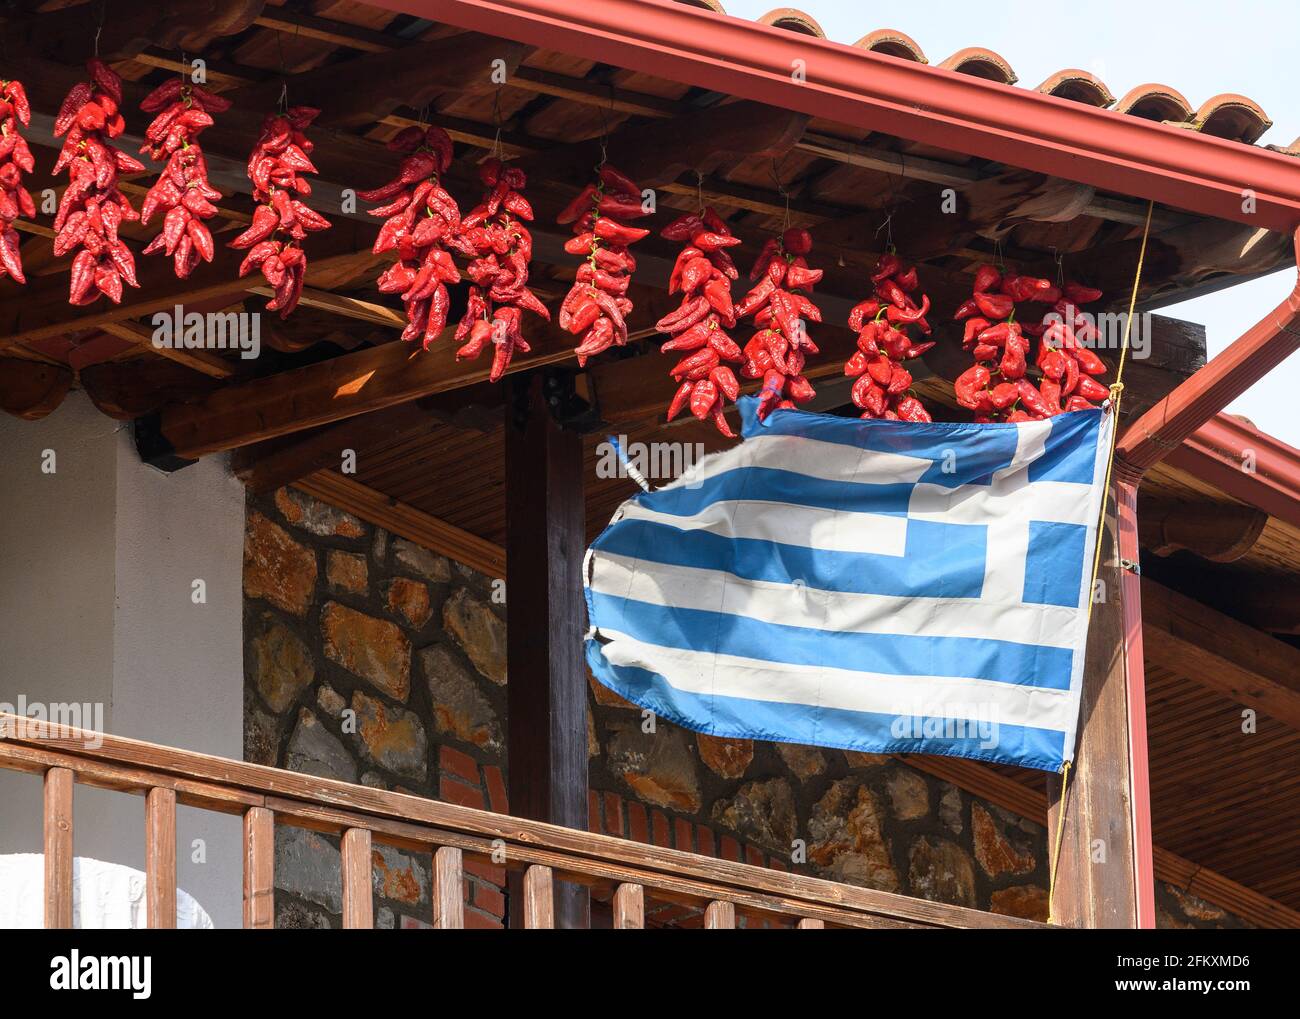 Chilli peppers drying and a Greek flag flying, on the balcony of  a house in the fishing village of Psarades on Lake Prespa, Macedonia, Northern Greec Stock Photo